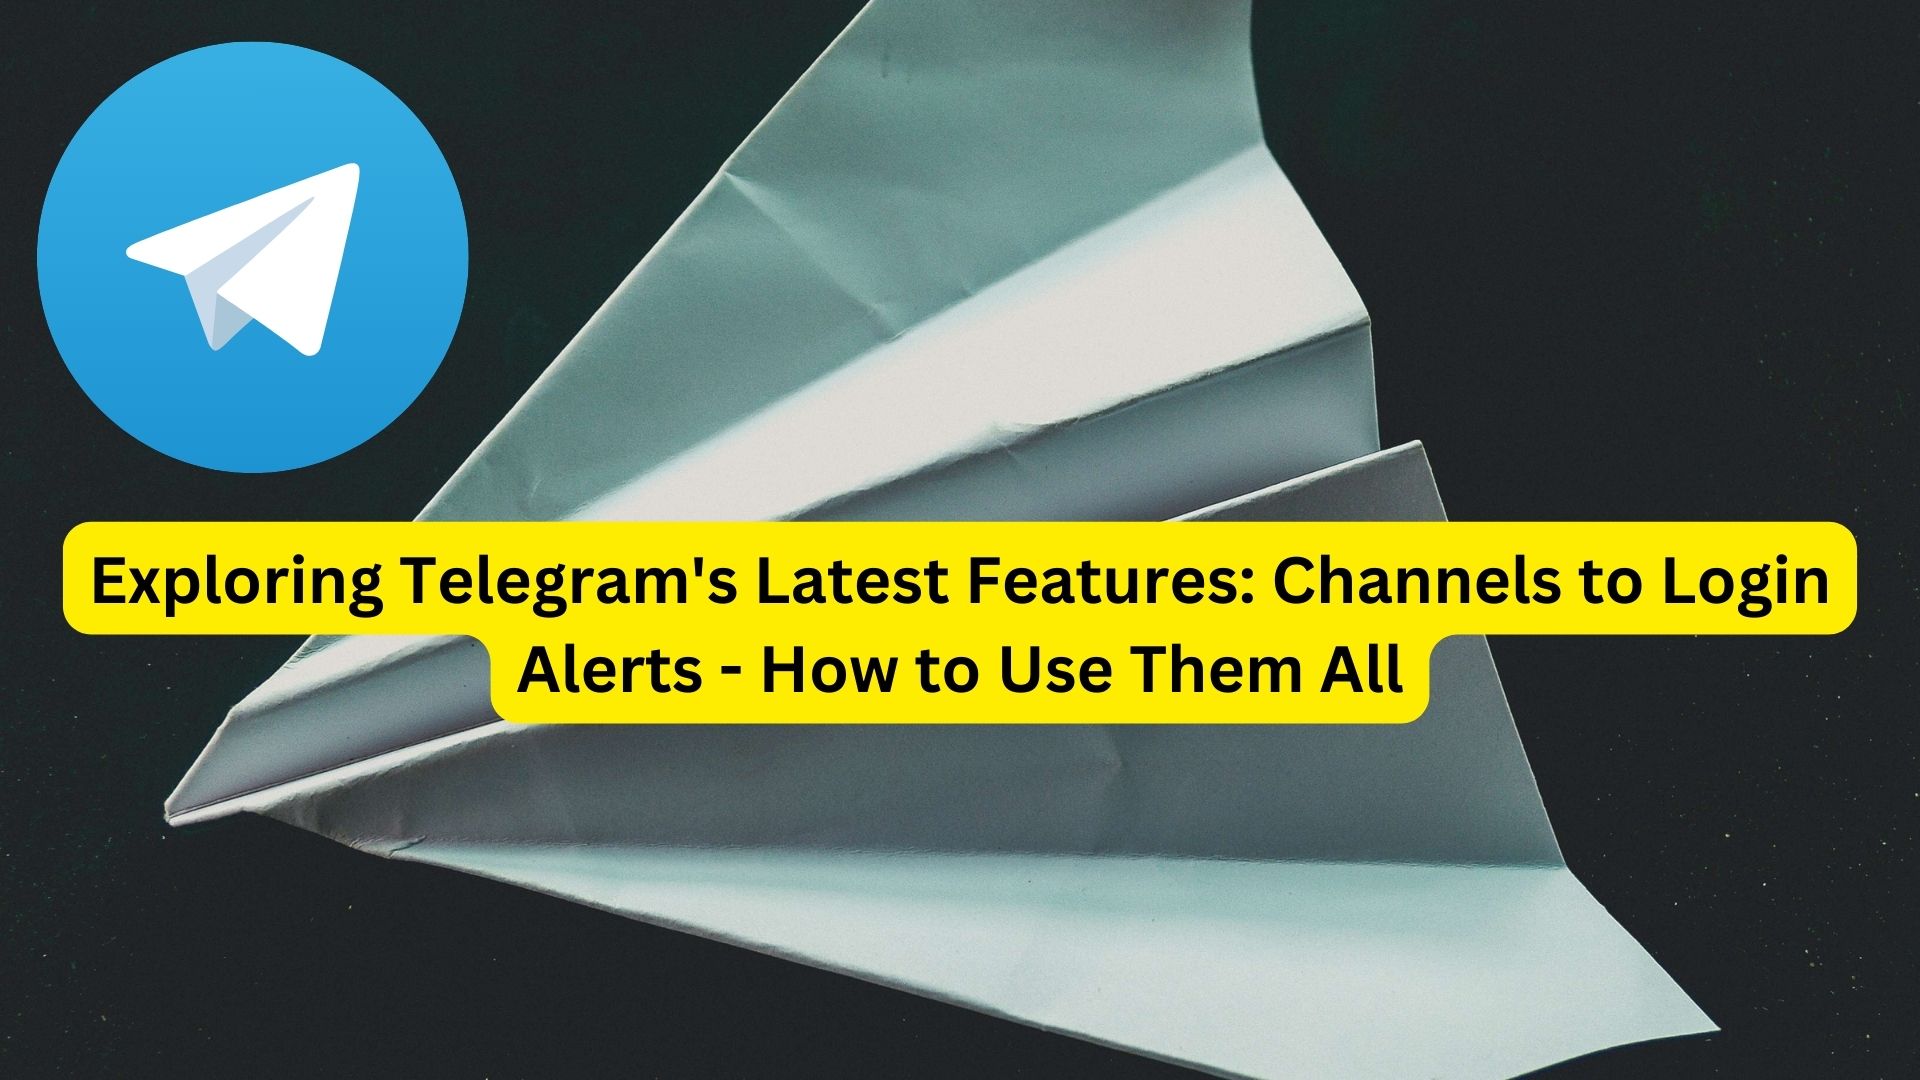 Exploring Telegram's Latest Features: Channels to Login Alerts - How to Use Them All